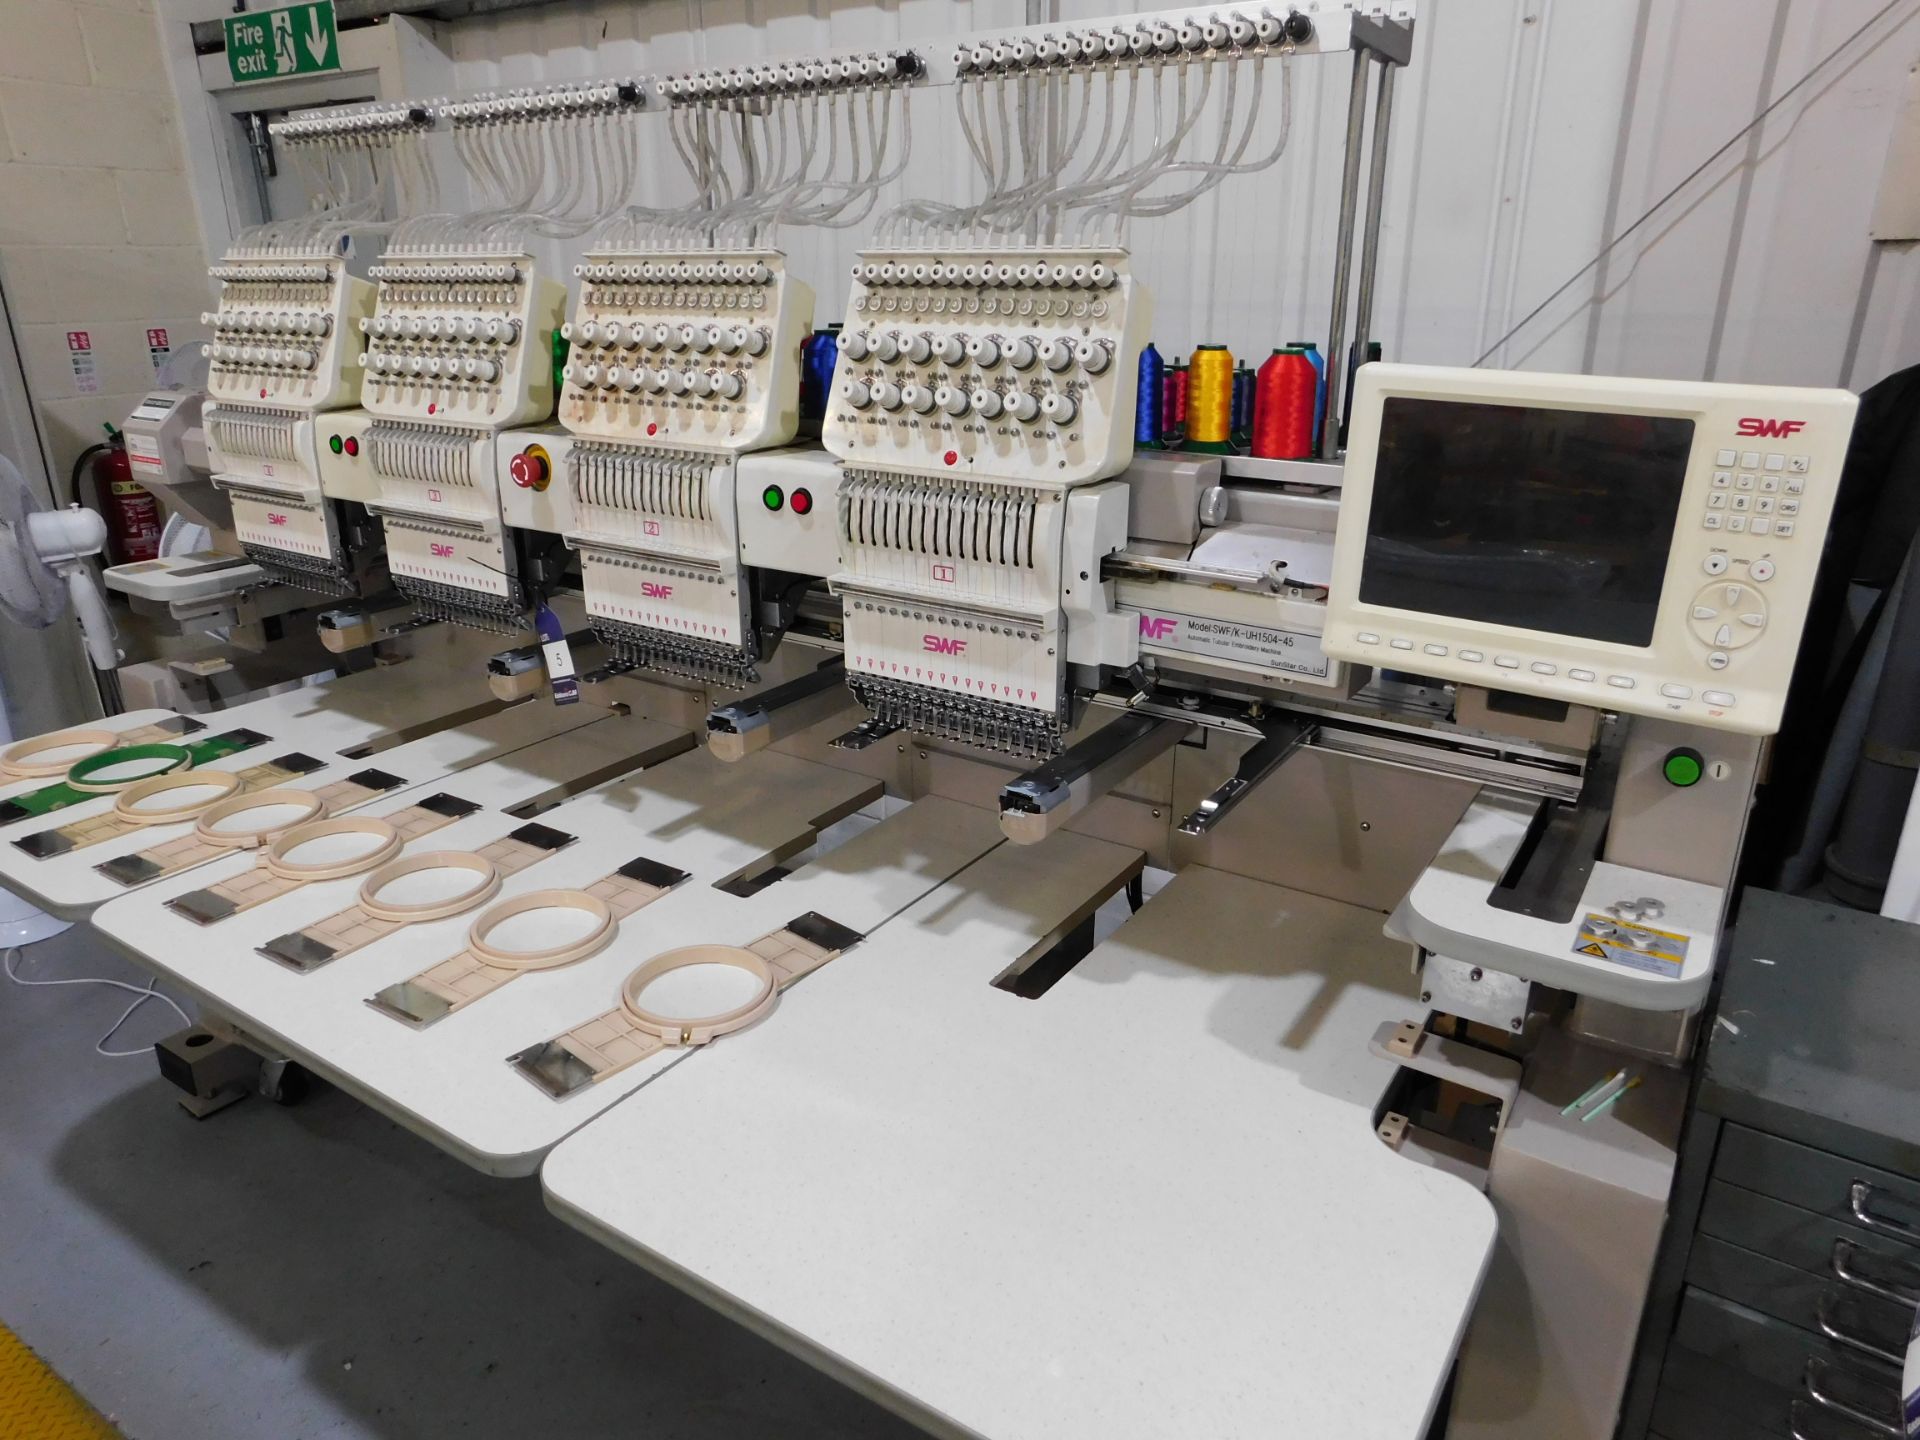 SWF Model SWF/KUH1504-45 Four Head Embroidery Machine s/n C4431209 400mmx450mm (Single Phase) - Image 2 of 6